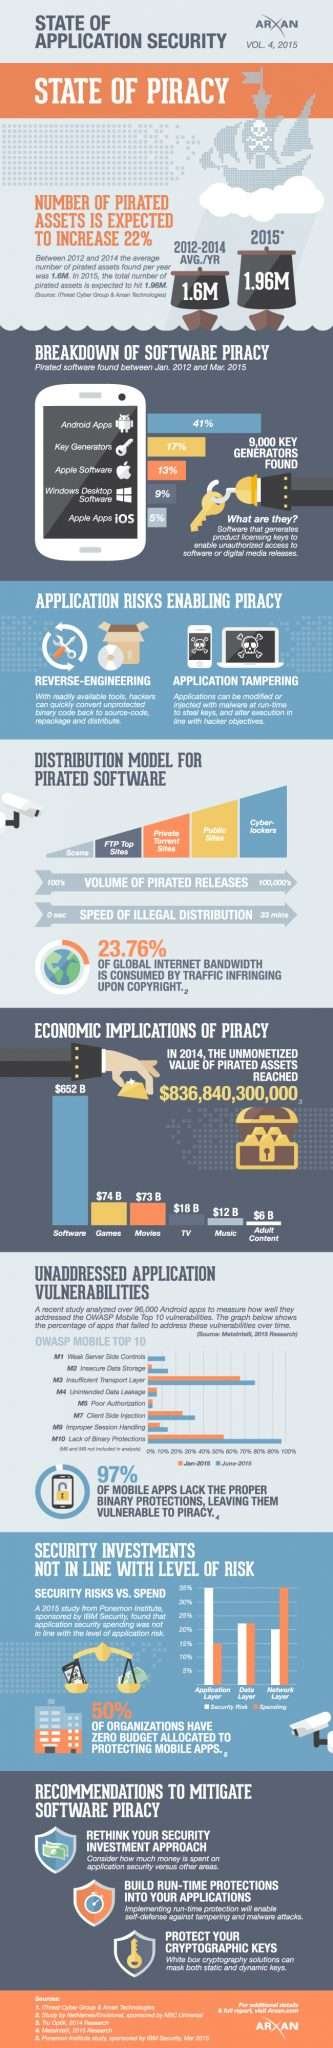 An Infographic and Report detailing How Piracy has Increased in 2015